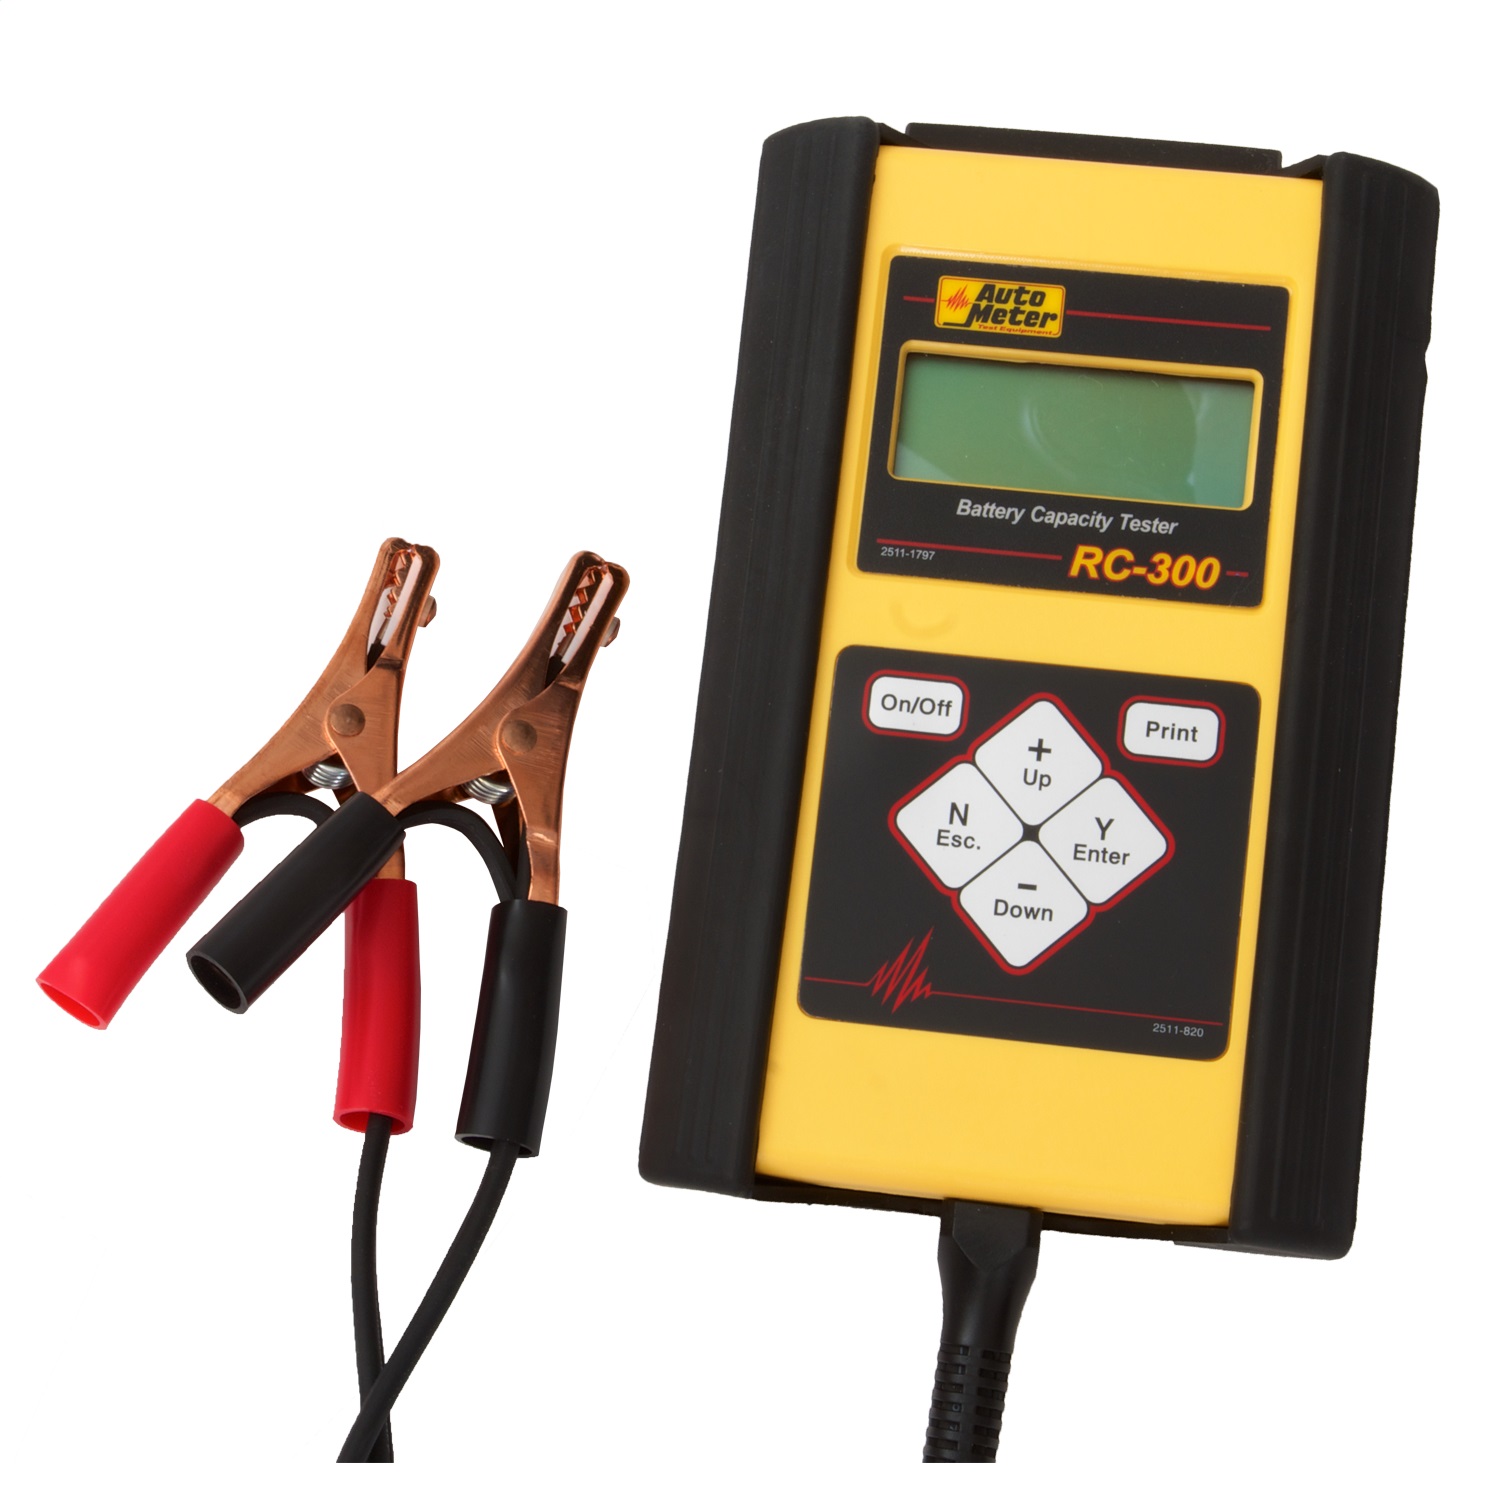 Auto Meter Auto Meter RC-300 Battery Tester